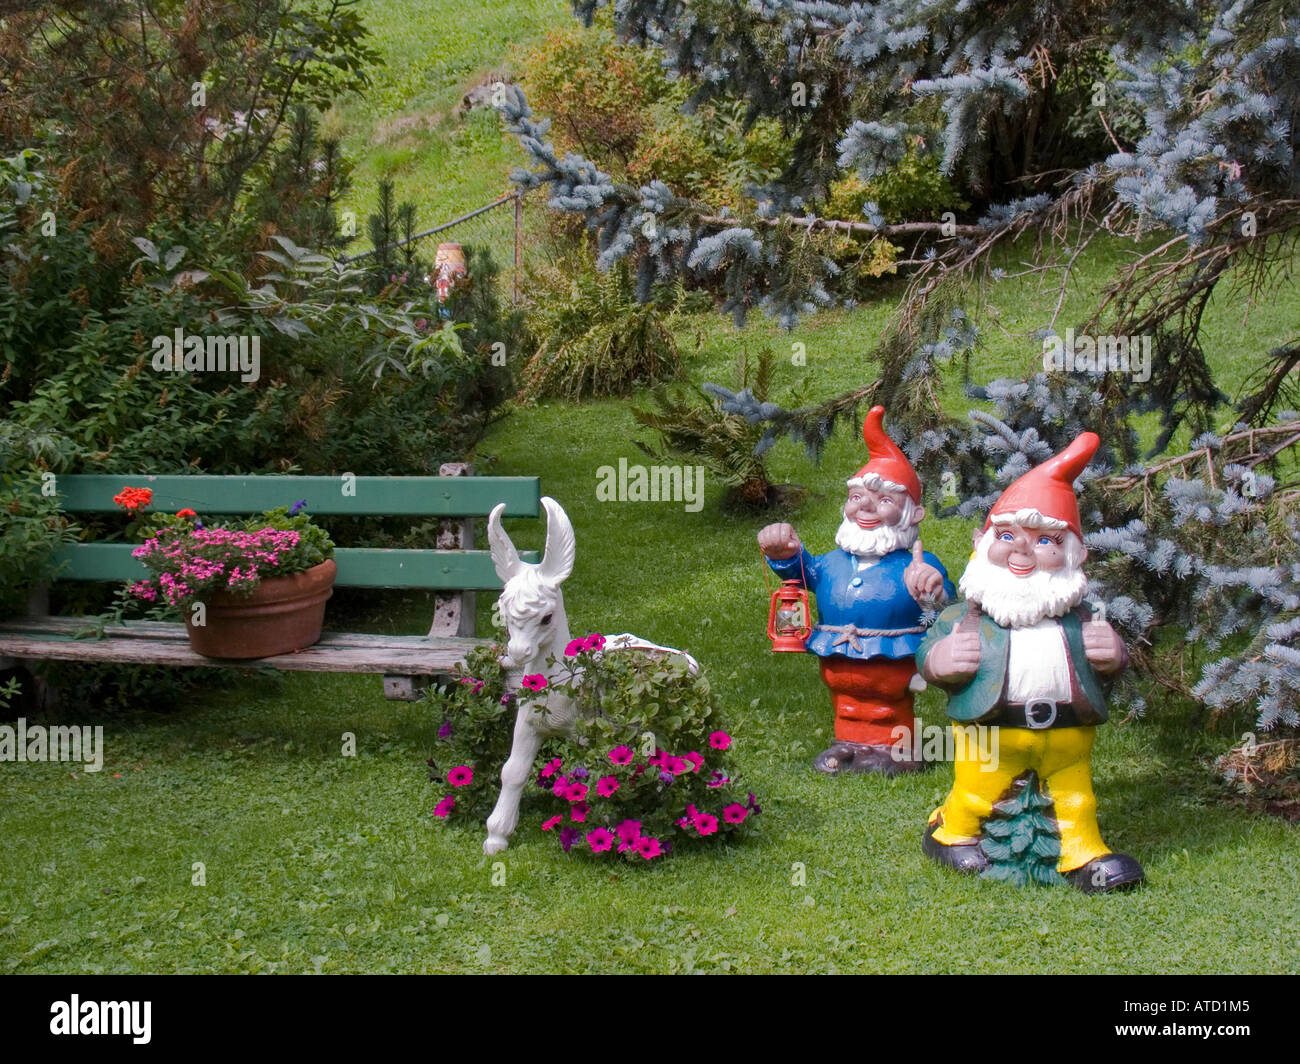 Garden gnomes and flowers in yard Gimmelwald Switzerland Stock Photo